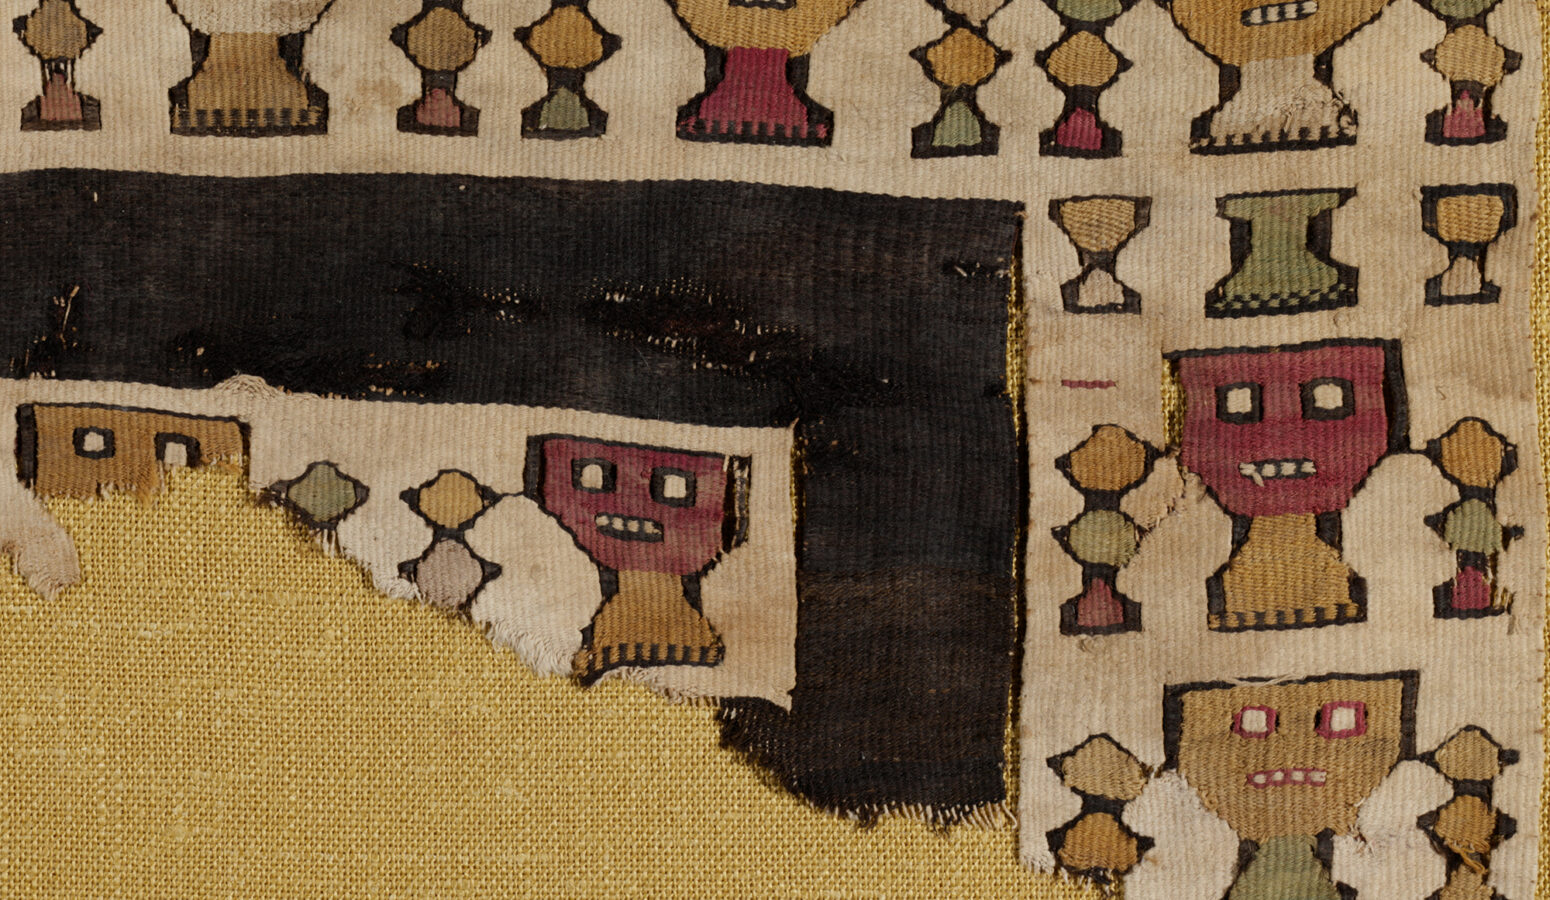 A fragment of a fringed brown textile with figures and geometric shapes dyed in different colors